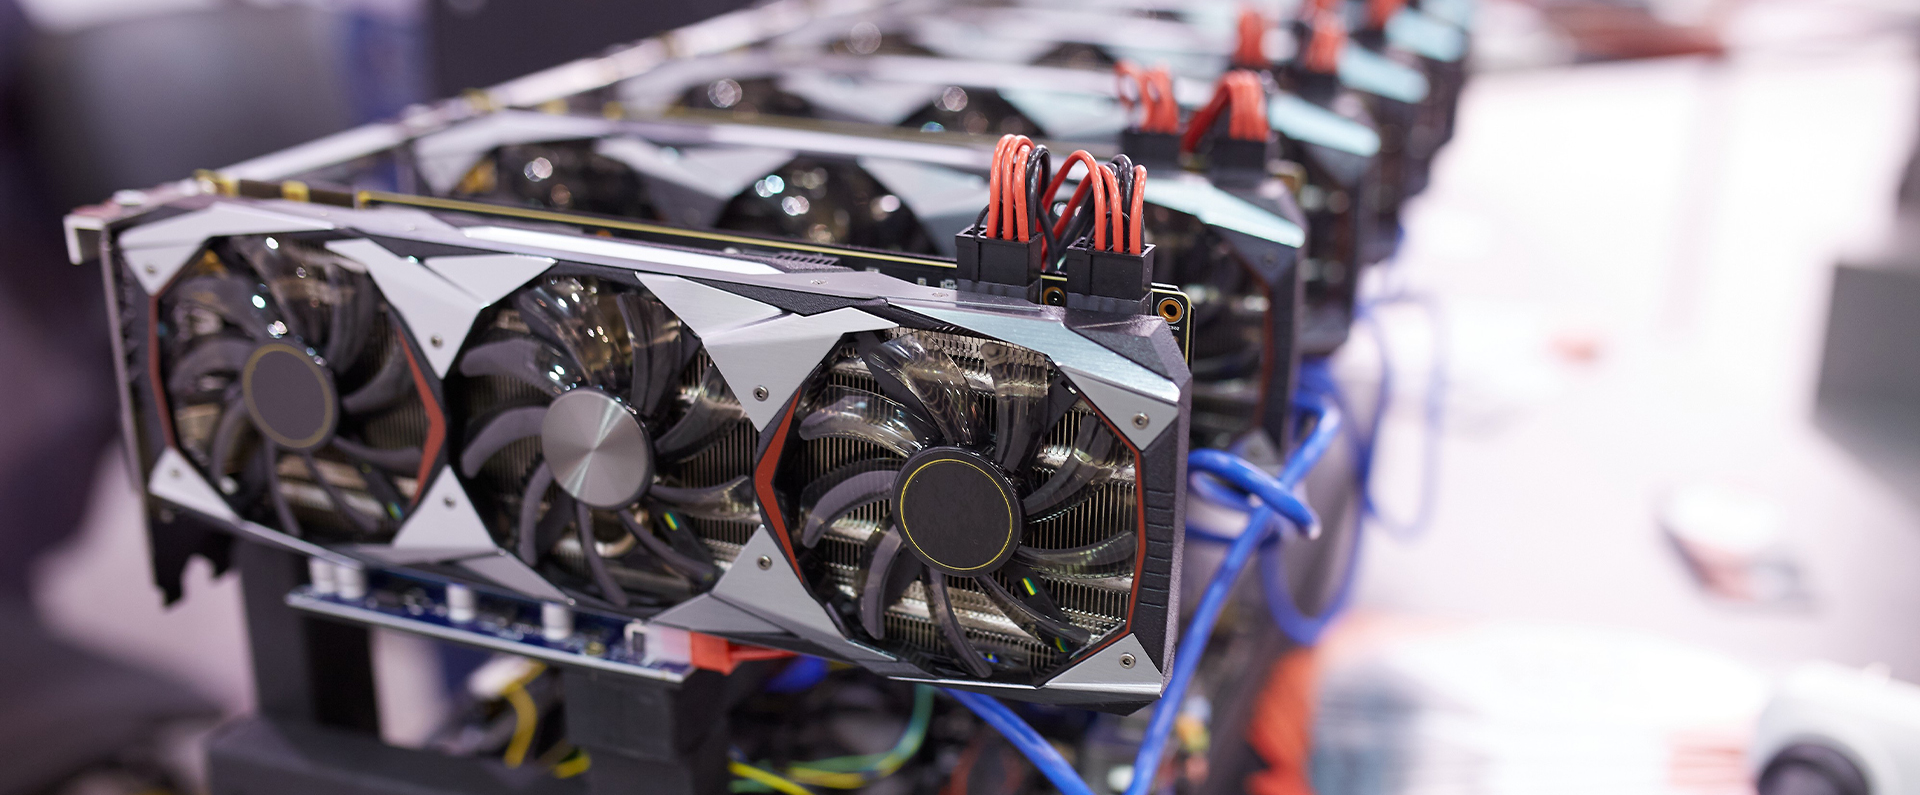 TOP video cards for mining